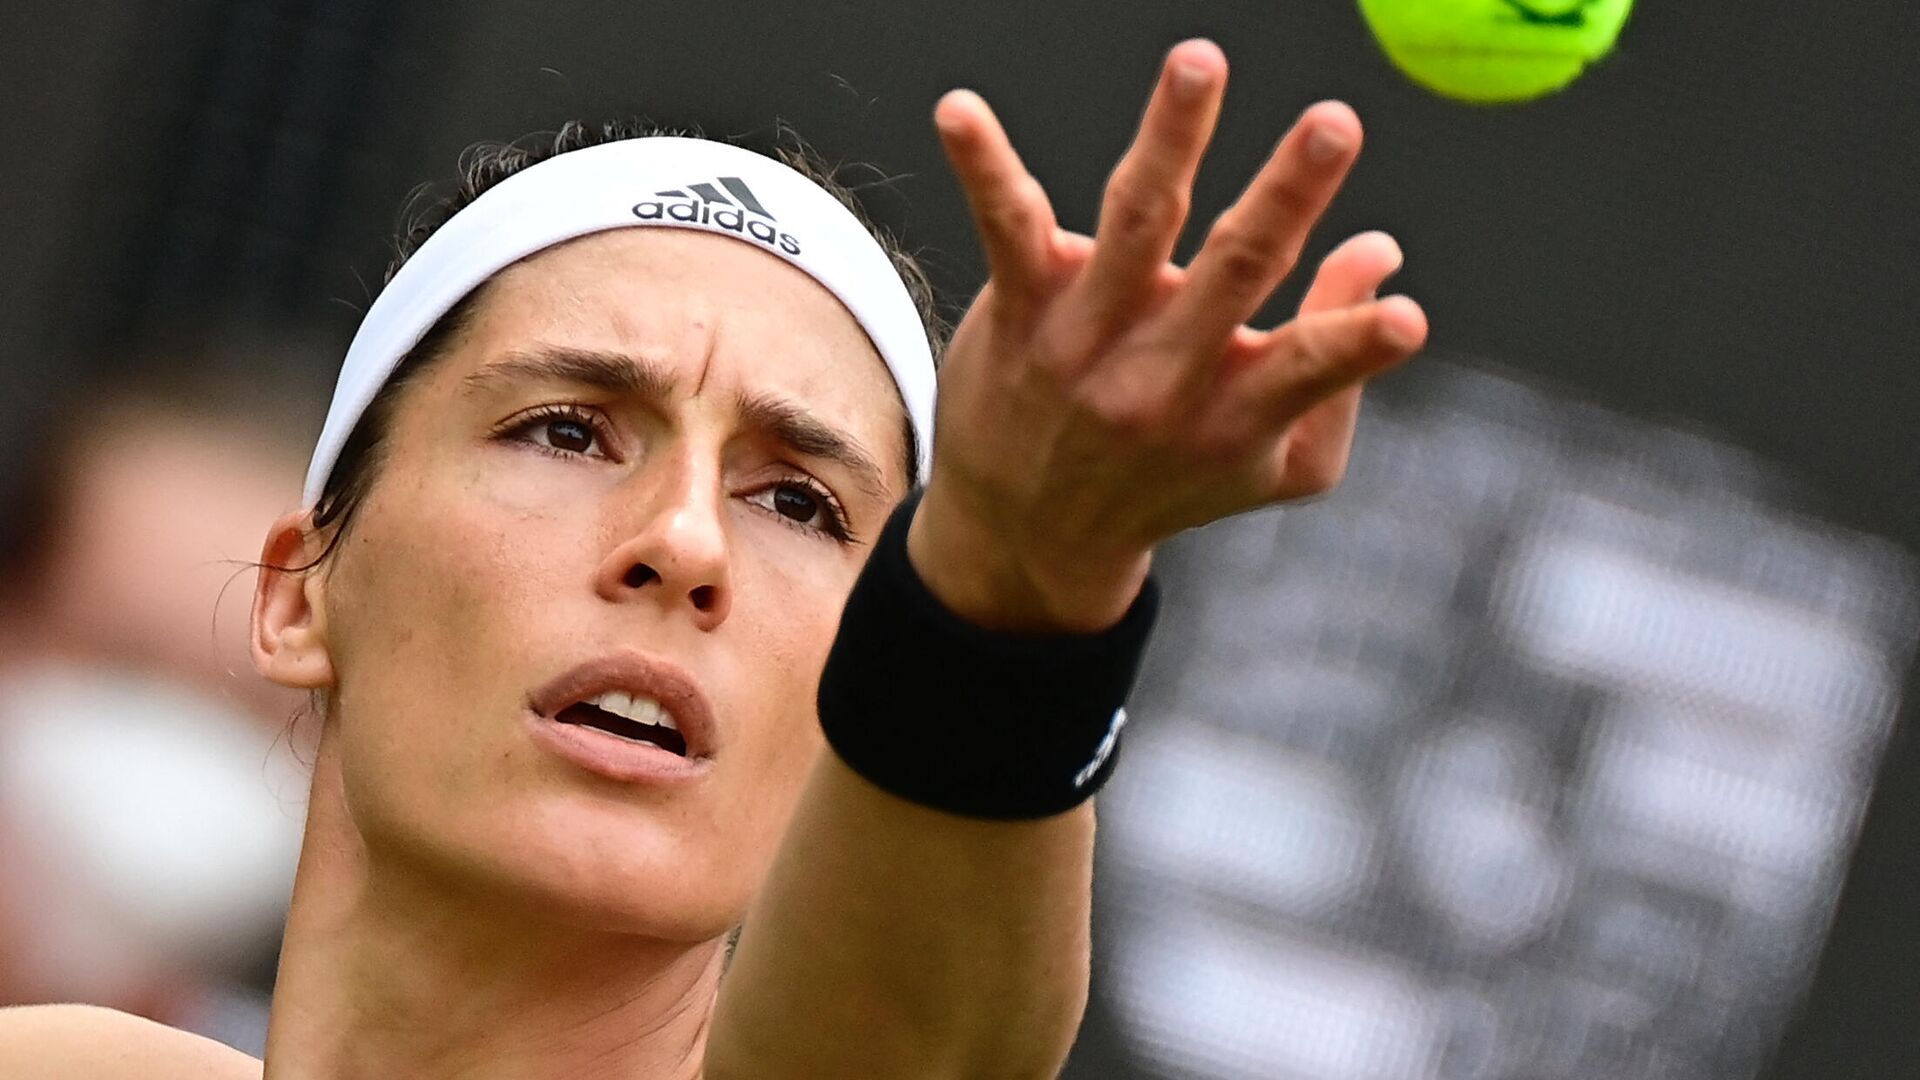 Germany's Andrea Petkovic serves a ball to Victoria Azarenka from Belarus during the women's Bett1 Open WTA 500 tennis tournament in Berlin on June 15, 2021. (Photo by Tobias Schwarz / AFP) - РИА Новости, 1920, 07.08.2021